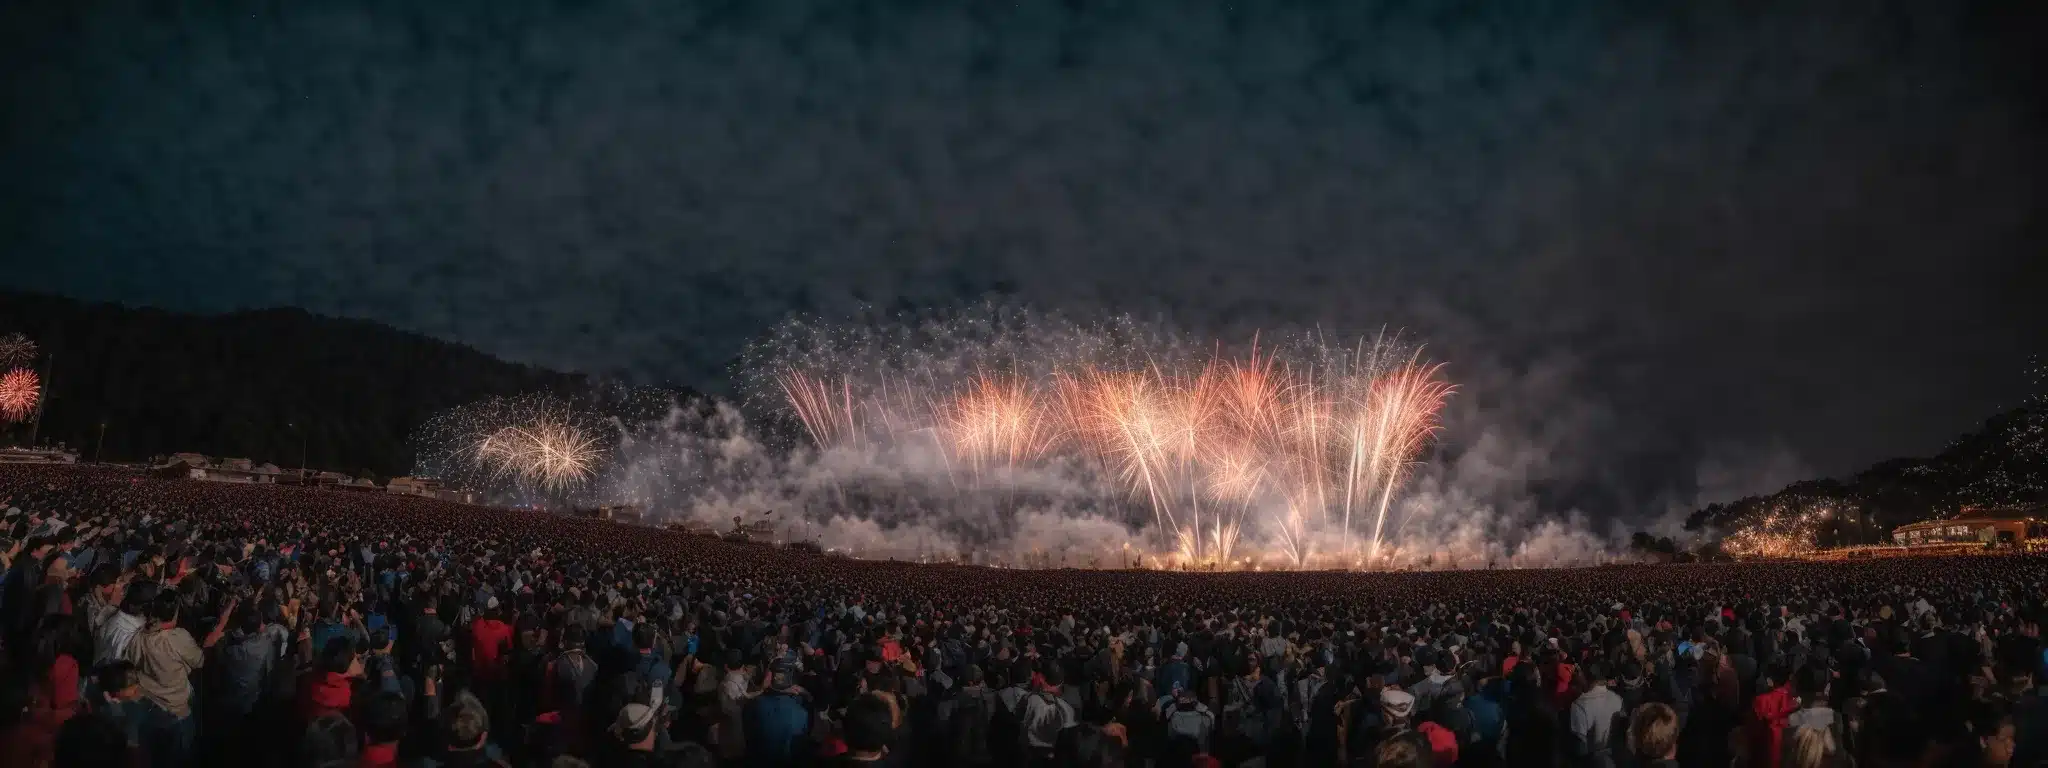 A Grand Opening Celebration With A Majestic Fireworks Display Illuminating The Sky Above A Crowd.